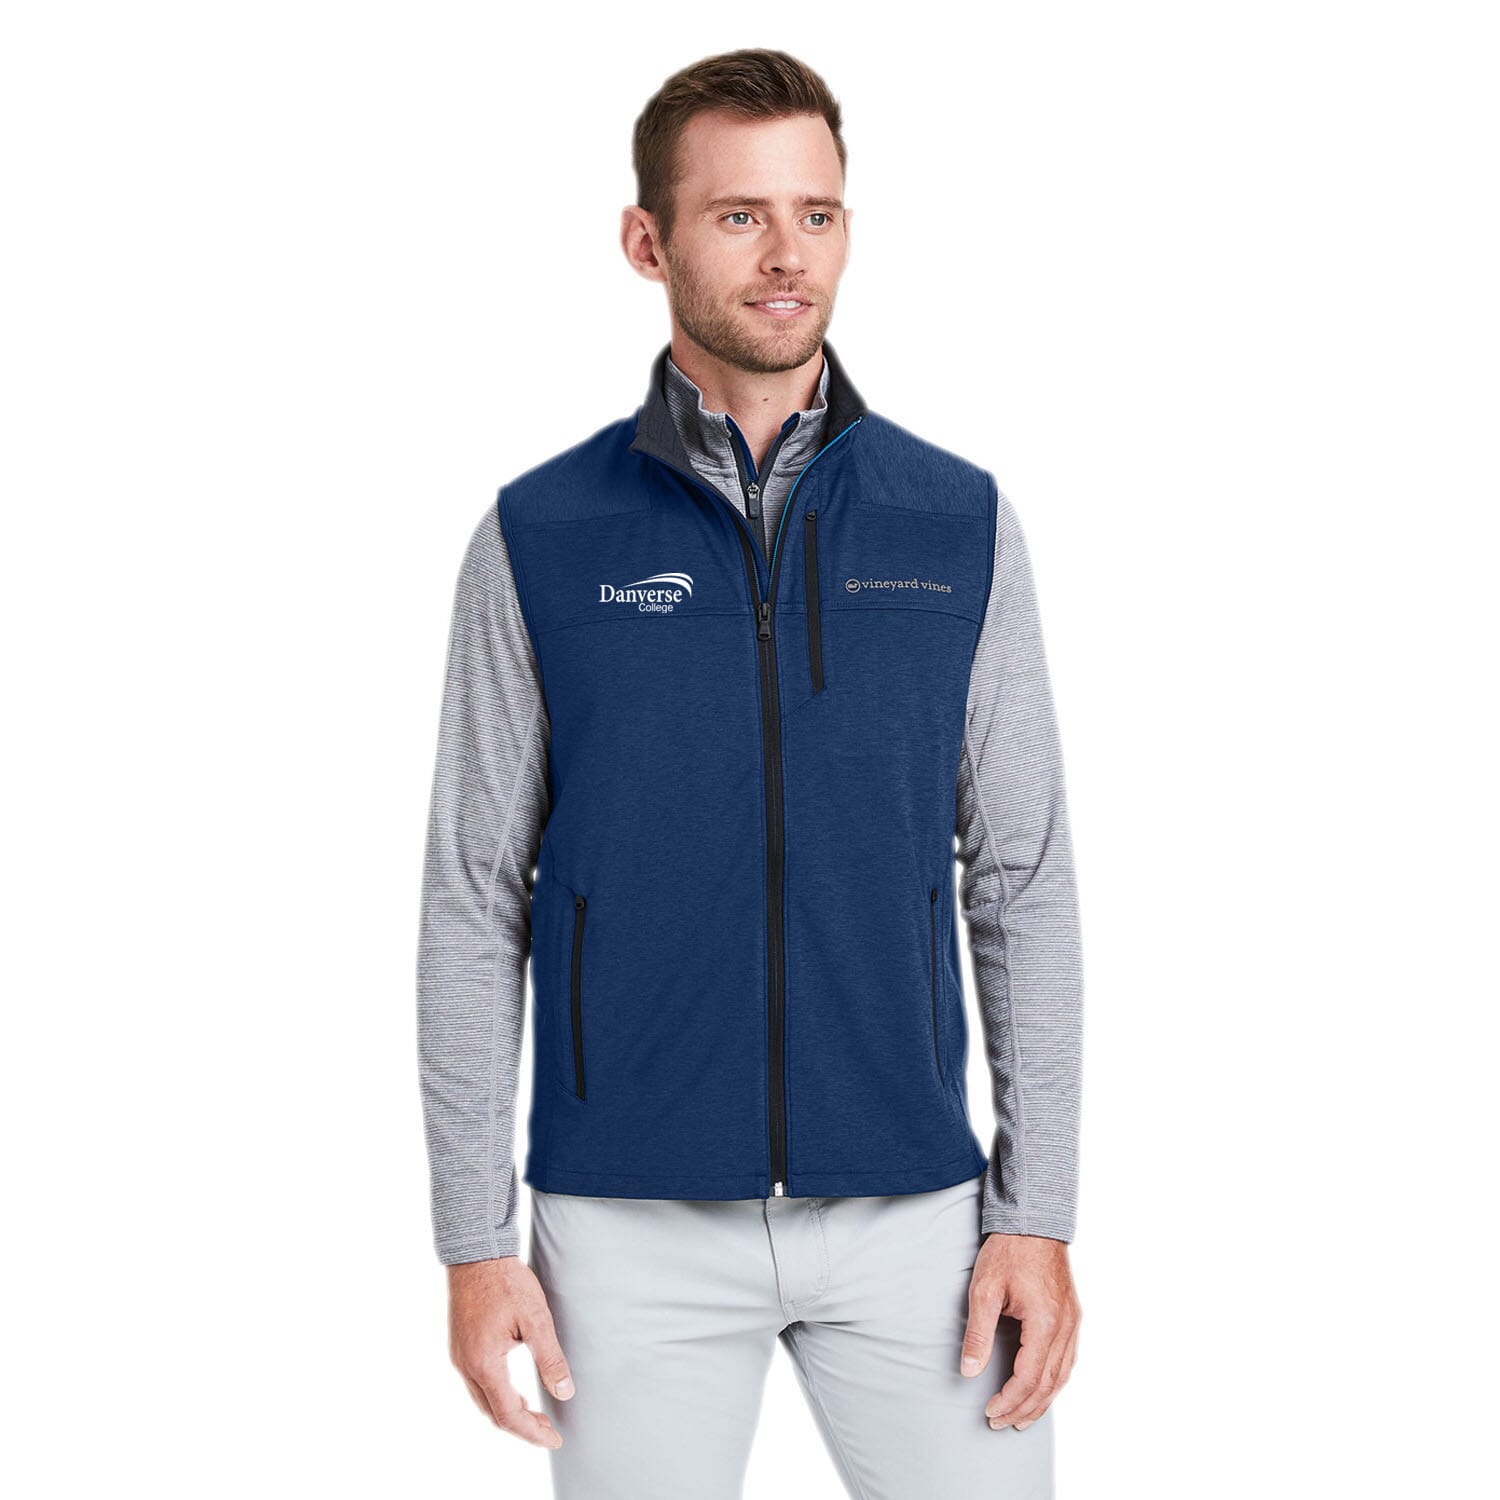 (6) DEEP BAY Men's Vineyard Vines® On-The-Go Shep Vest, EMBROIDERY (UP TO  10,000 STITCHES)